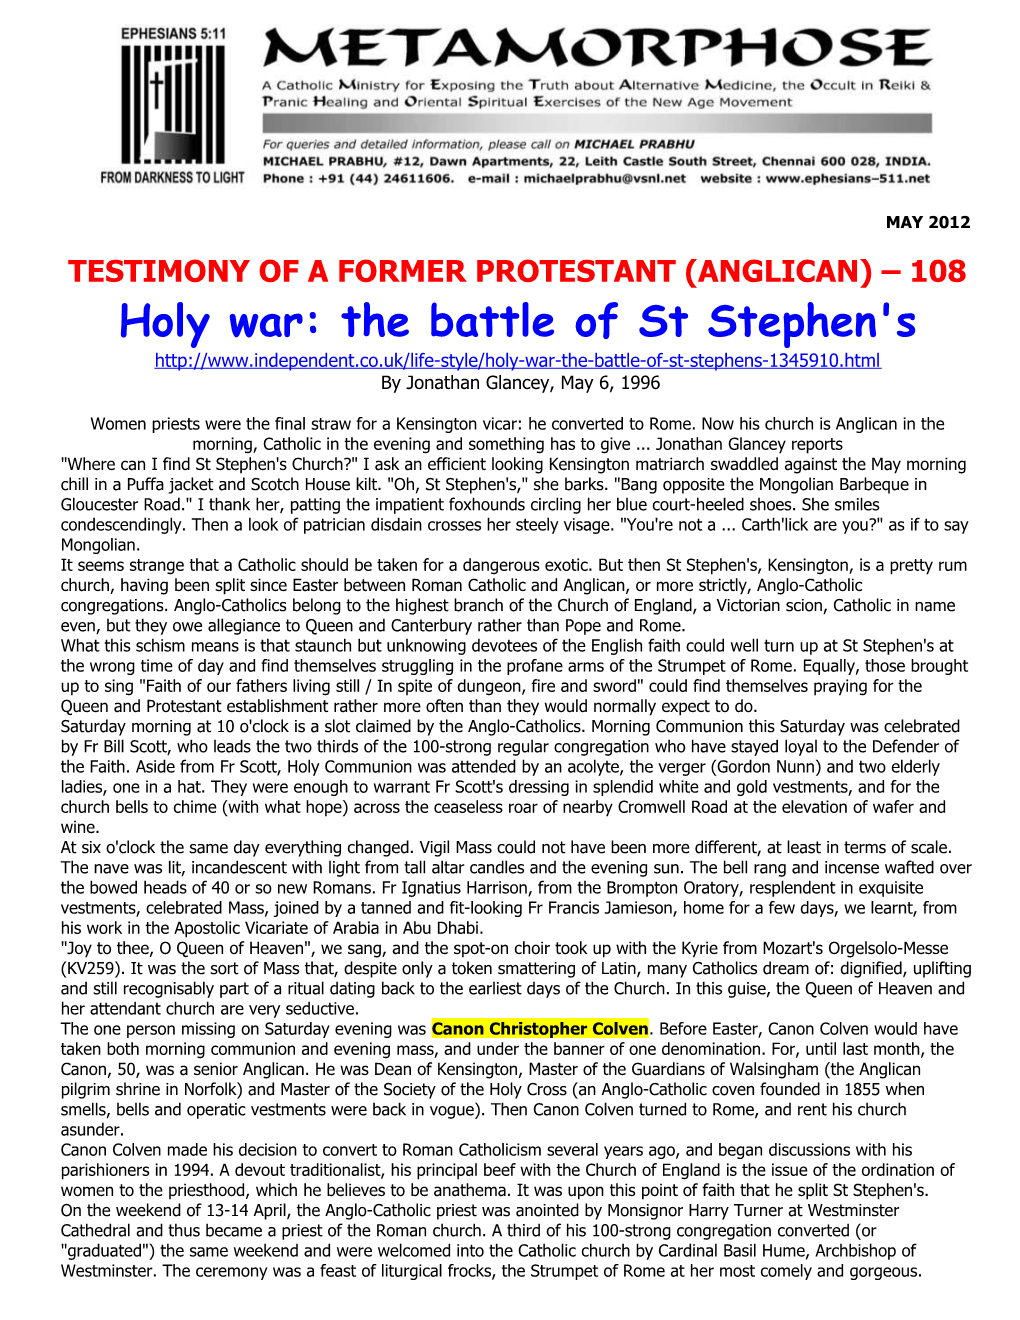 Testimony of a Former Protestant (Anglican) 108